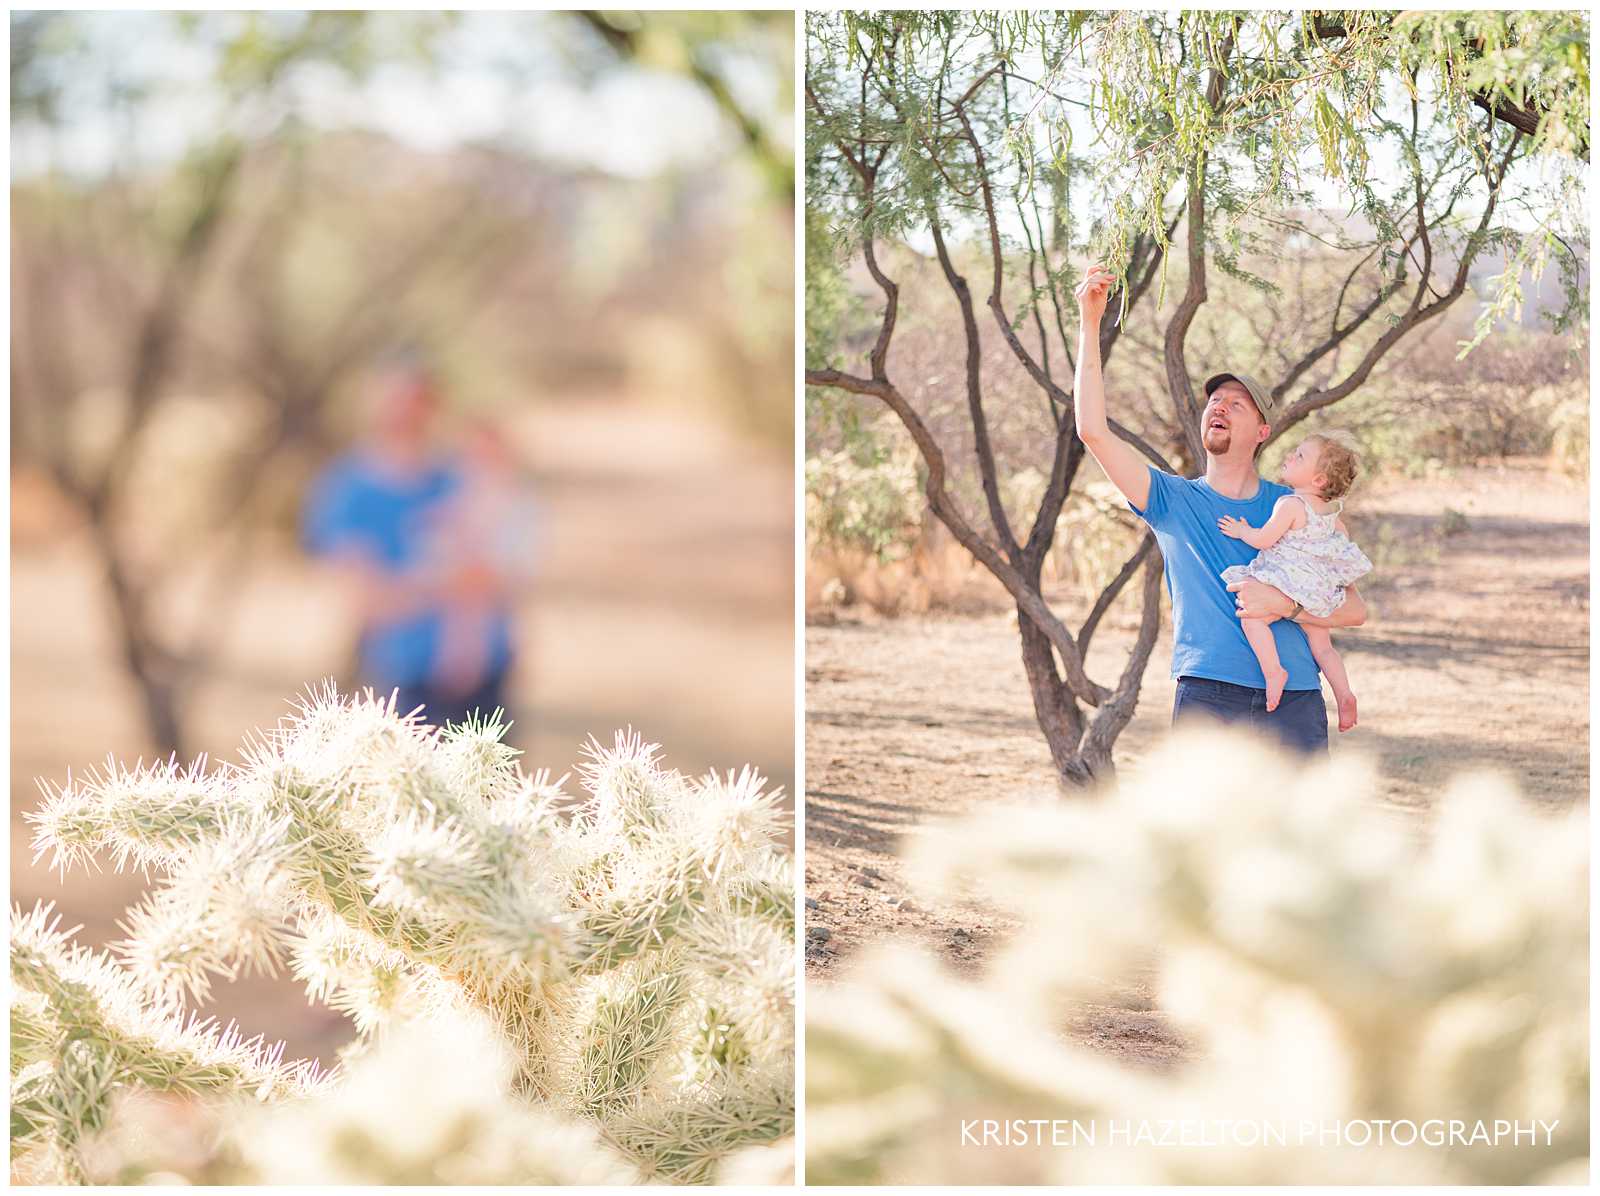 Tucson desert family portraits of a dad holding his baby daughter by photographer Kristen Hazelton